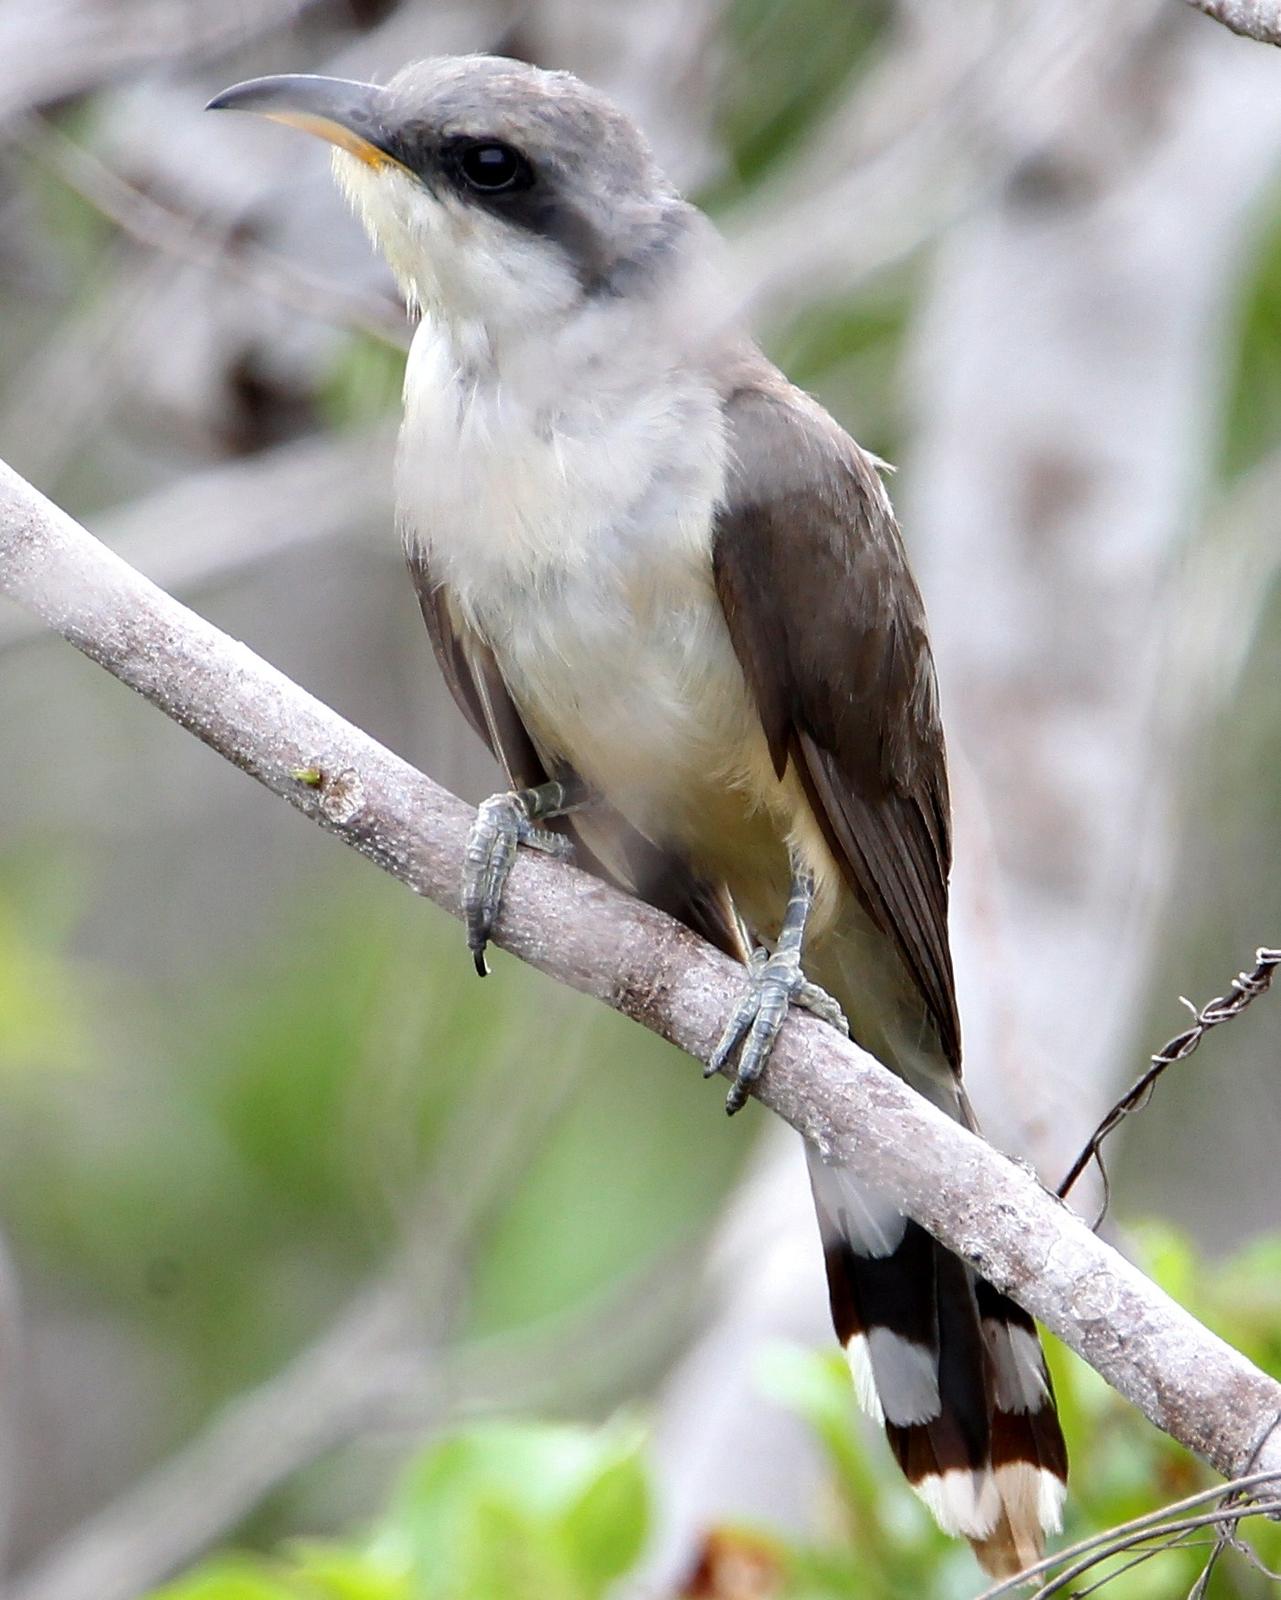 Mangrove Cuckoo Photo by Monte Taylor